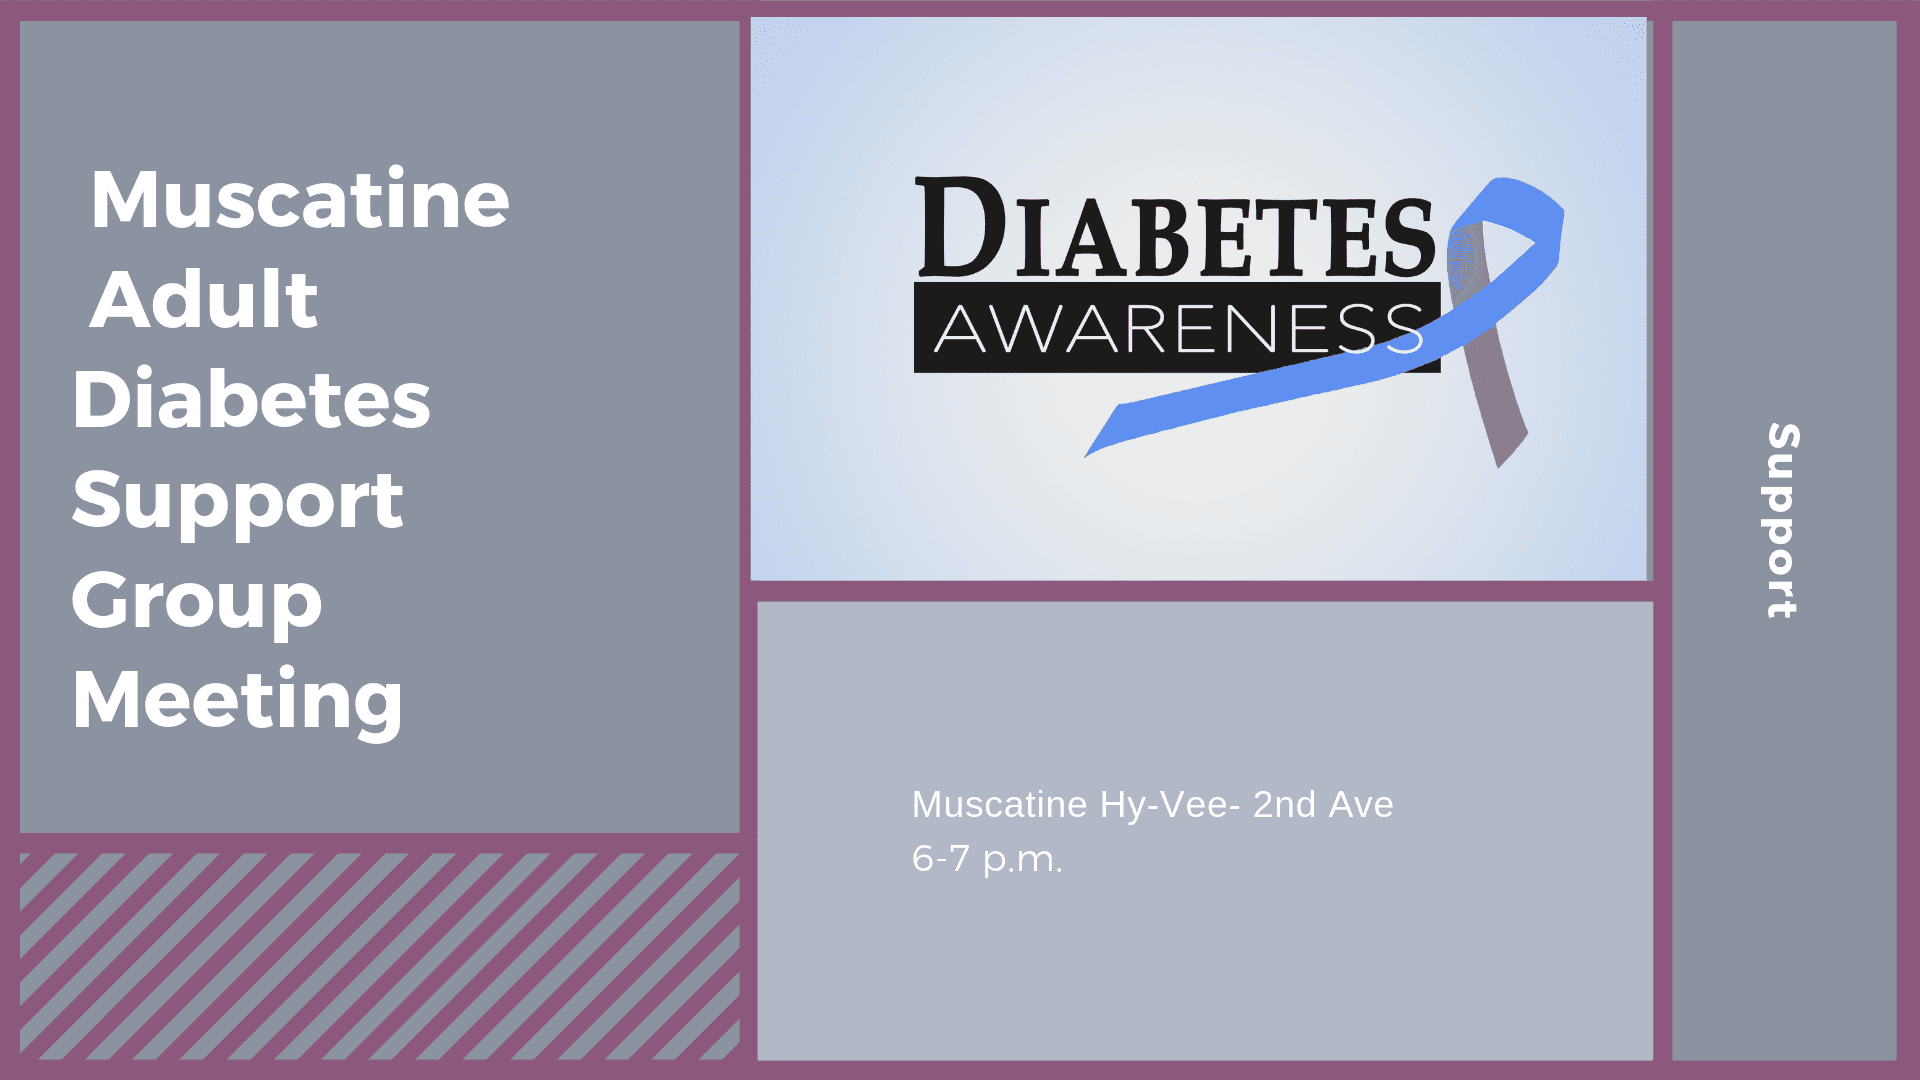 Muscatine Adult Diabetes Support Group Meeting